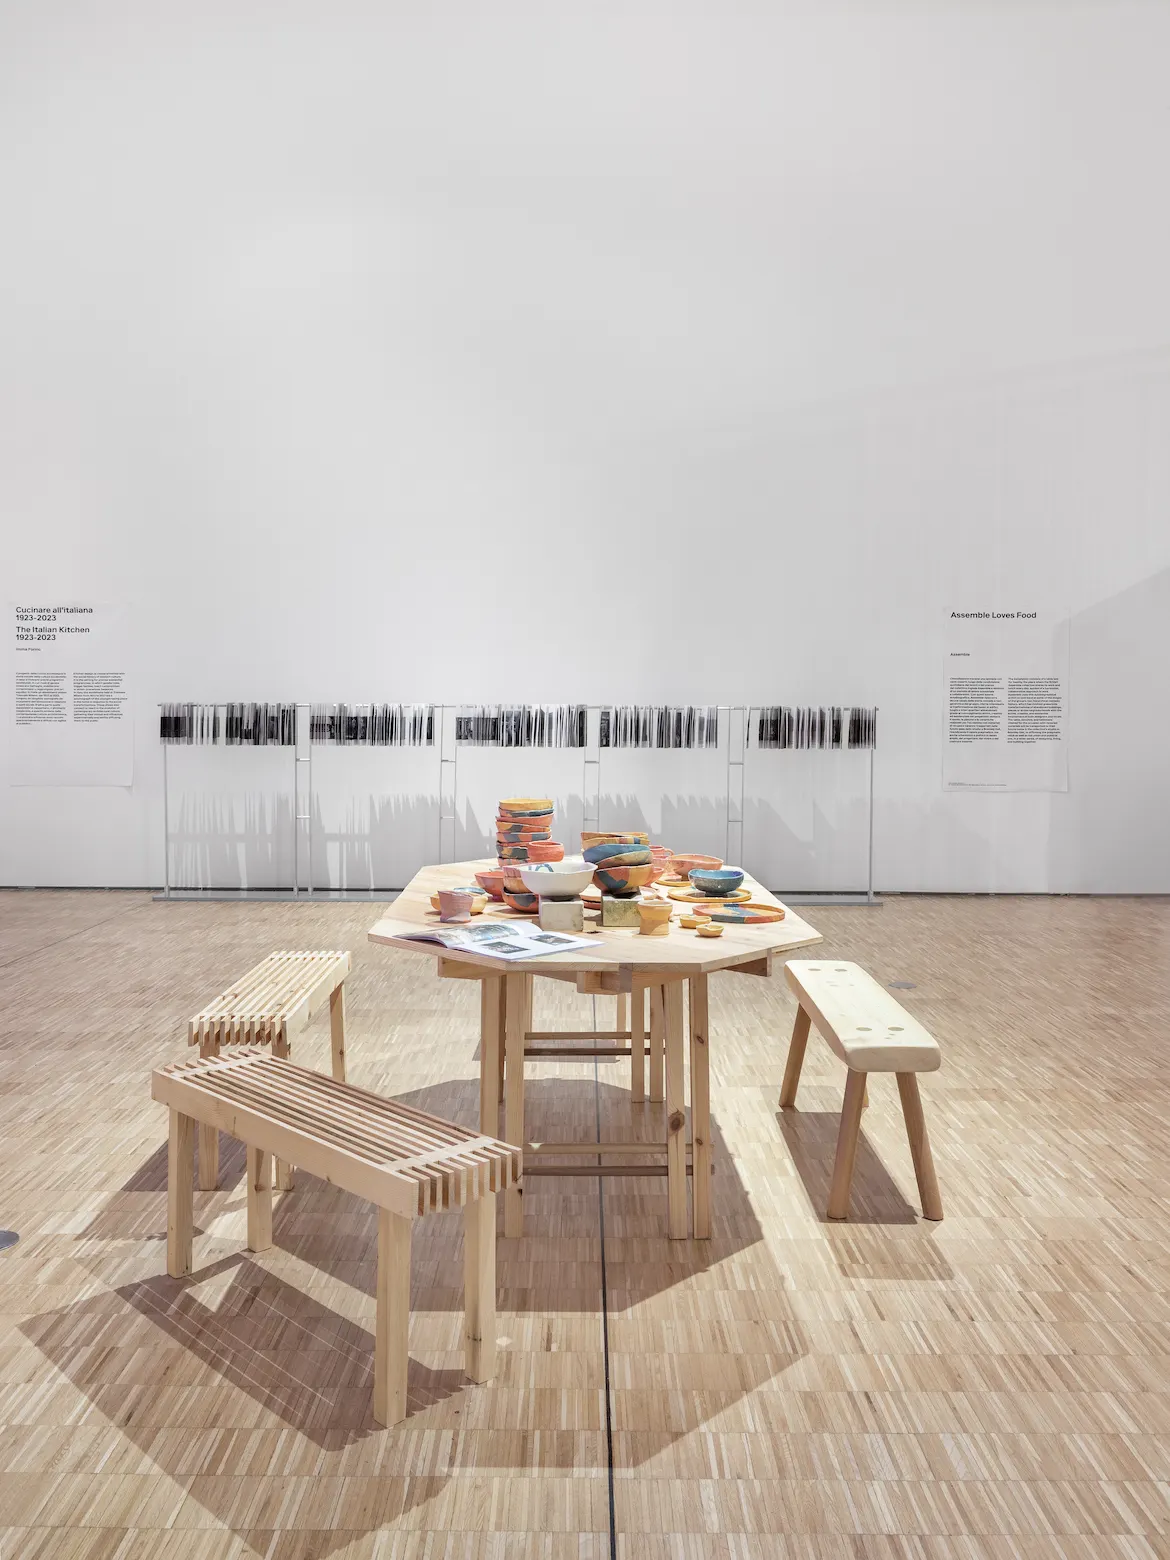 a museum installation featuring a kitchen table scene